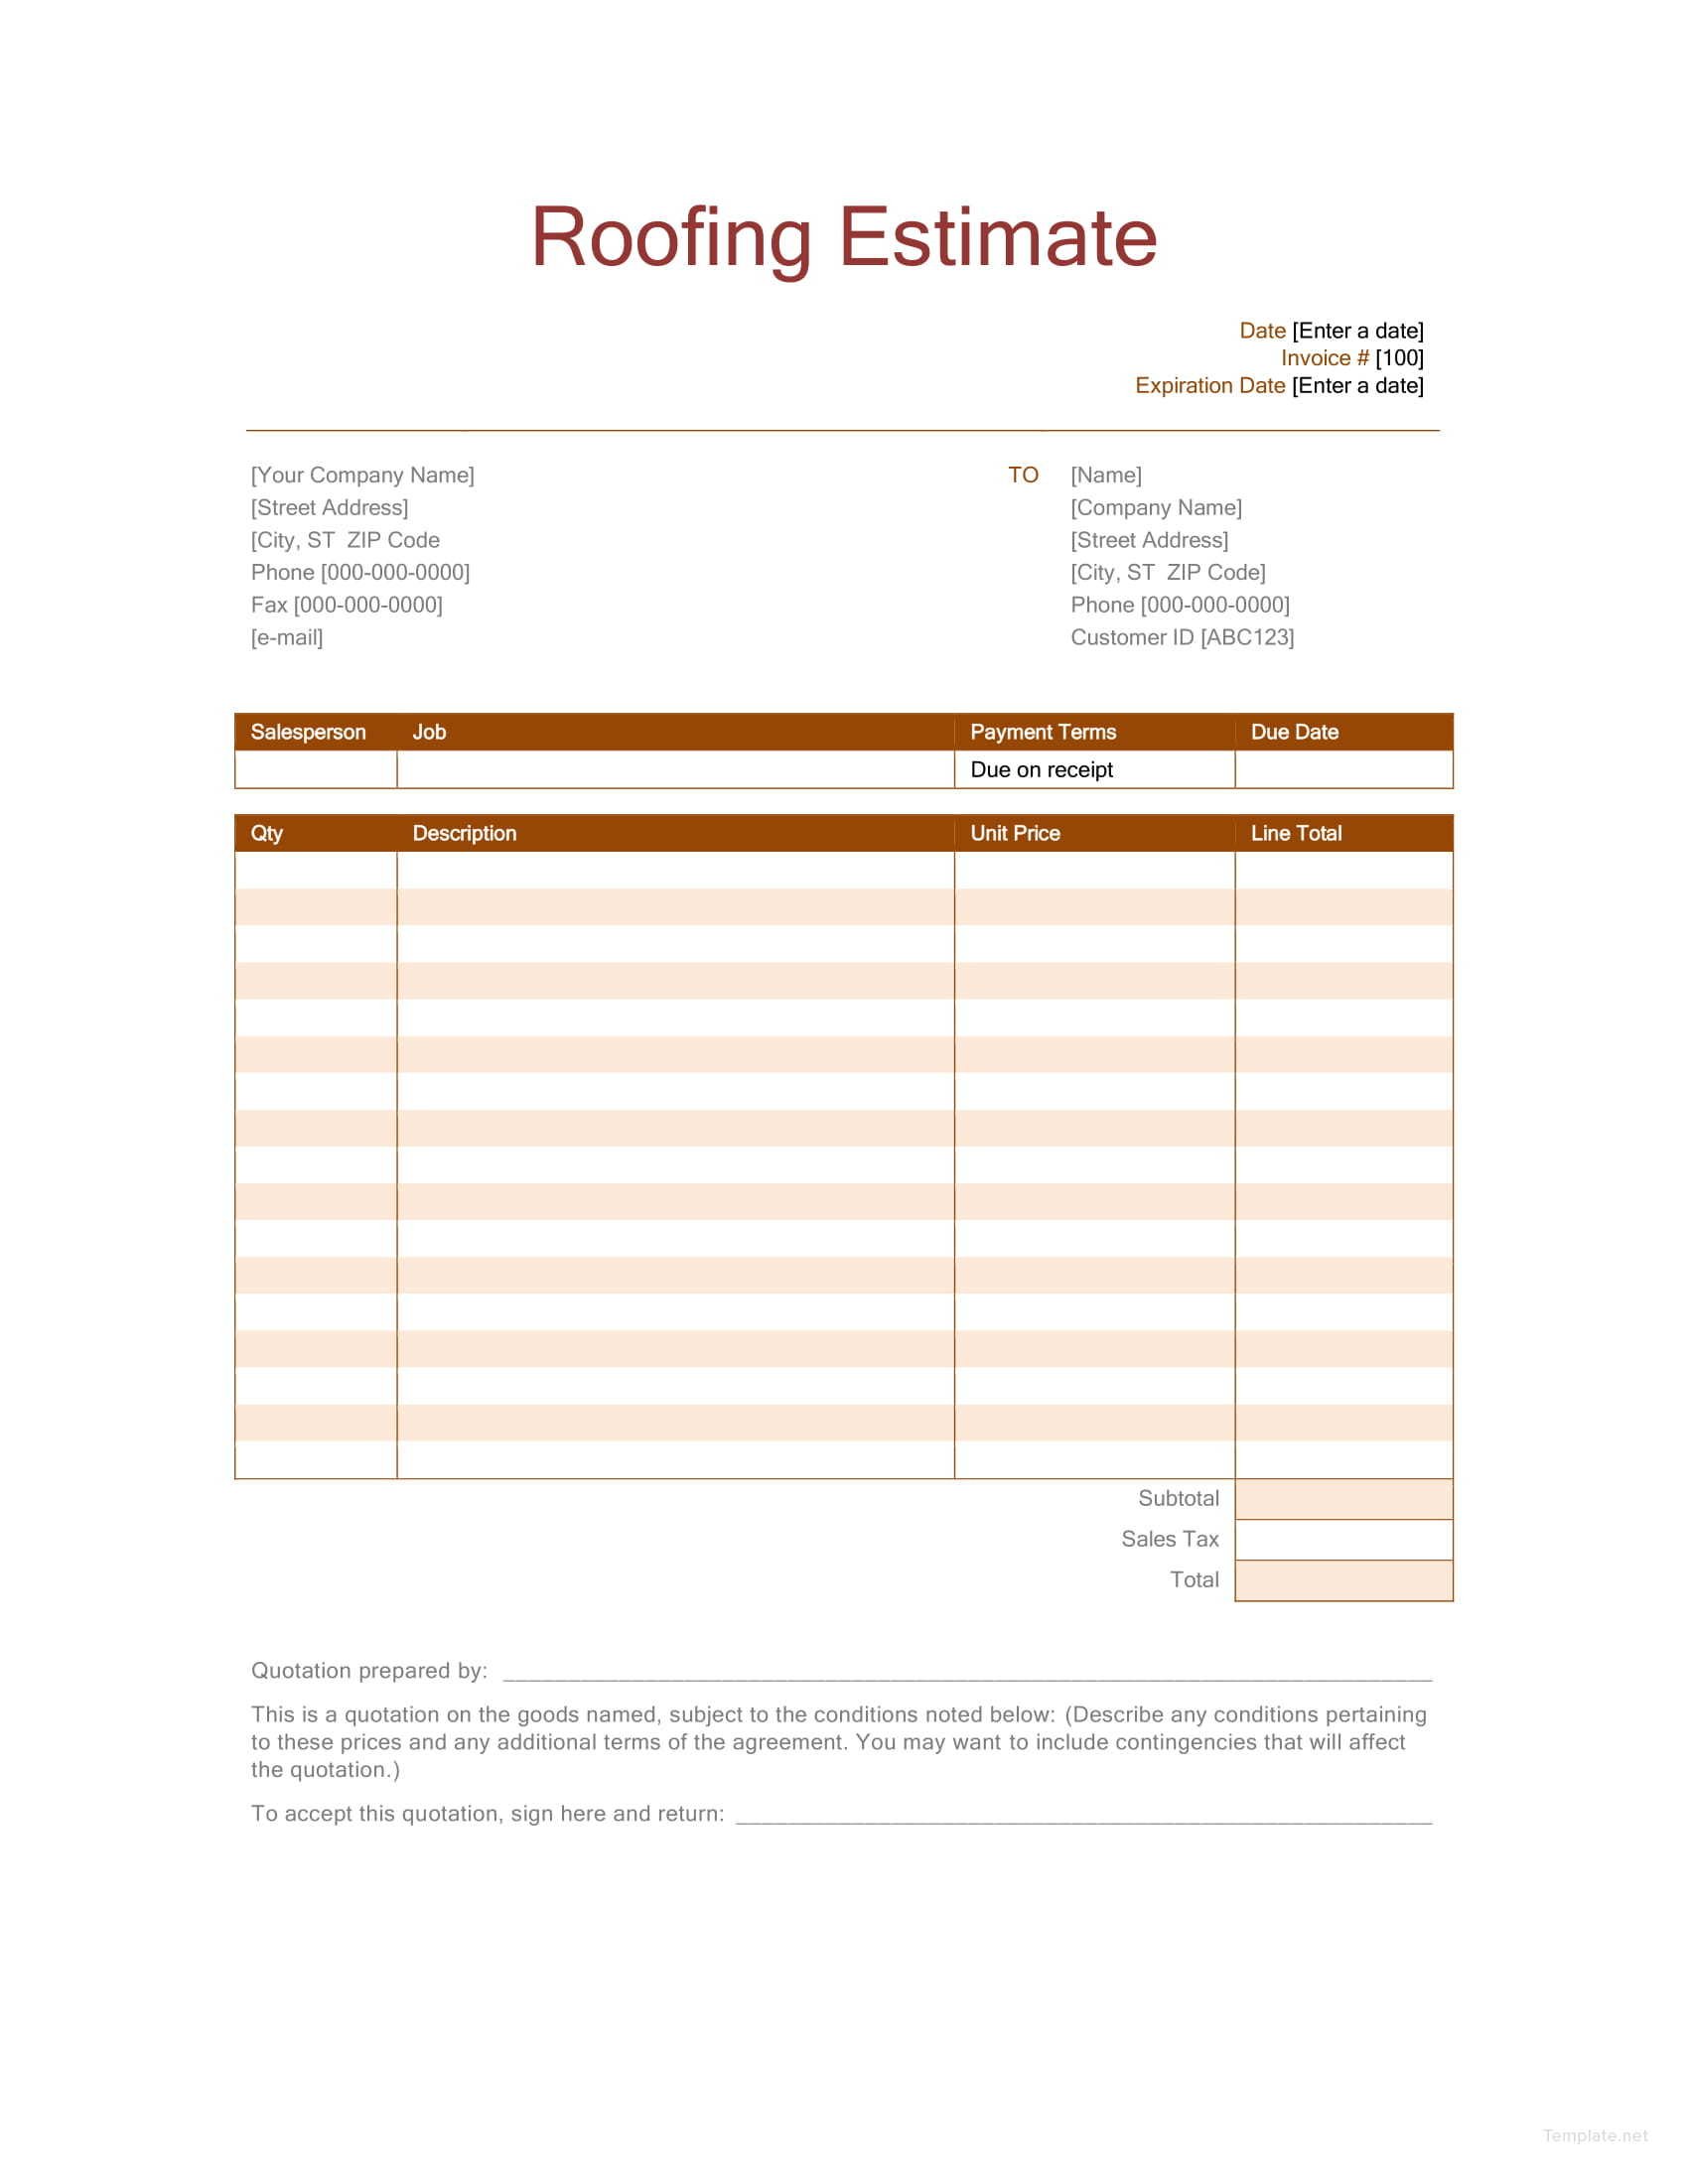 Roofing Estimate Template In Microsoft Word Excel Template